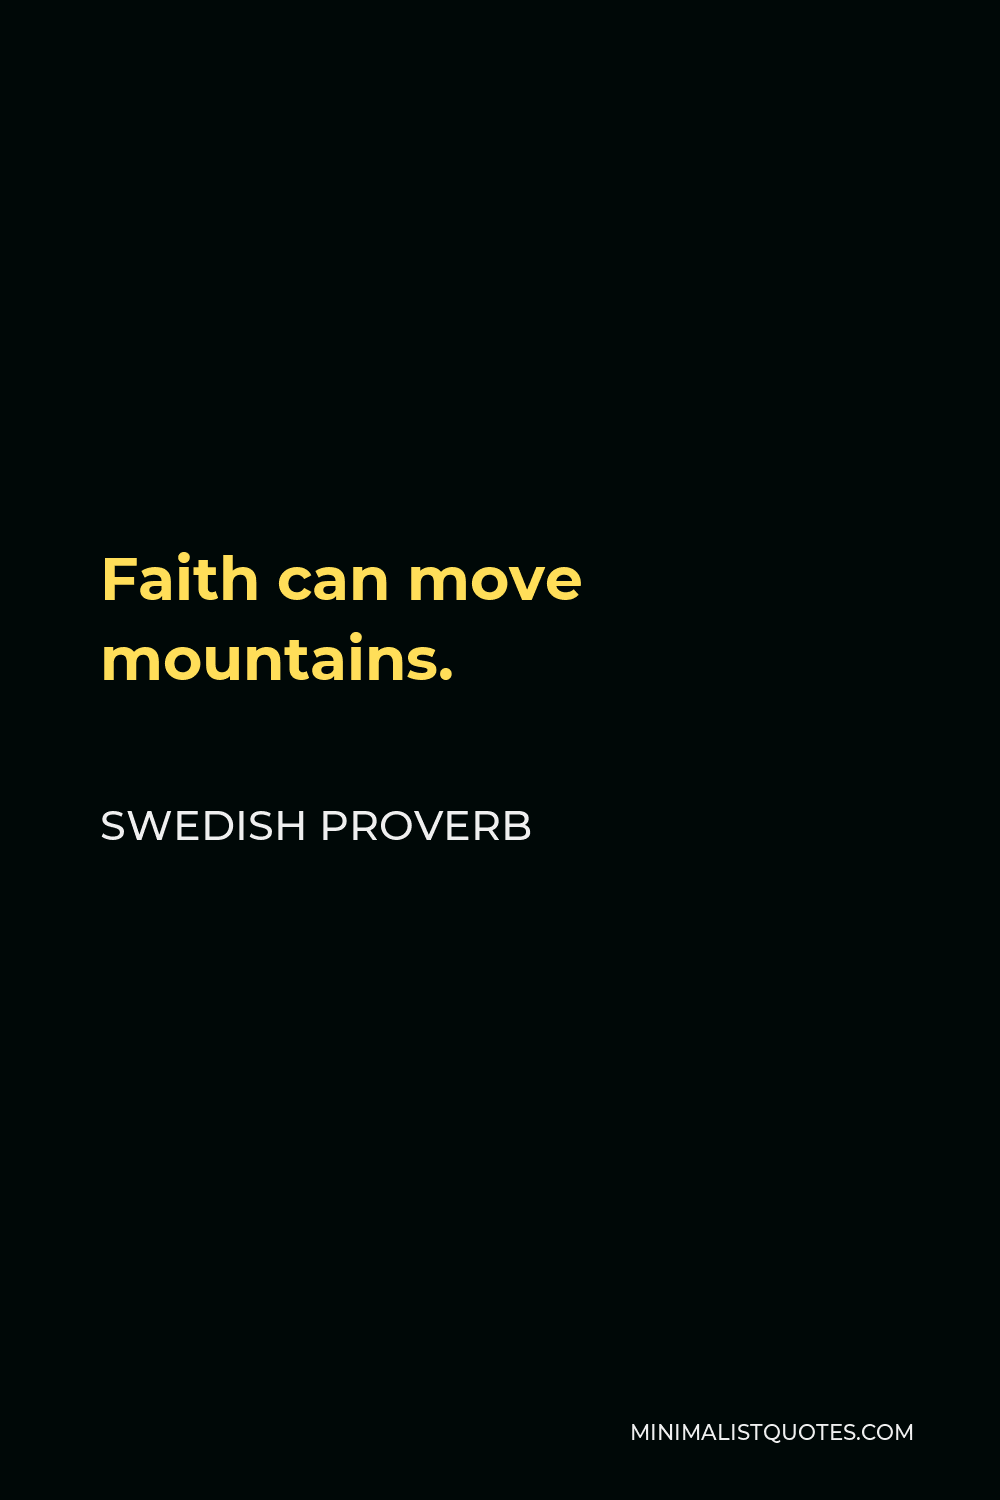 Swedish Proverb Quote - Faith can move mountains.